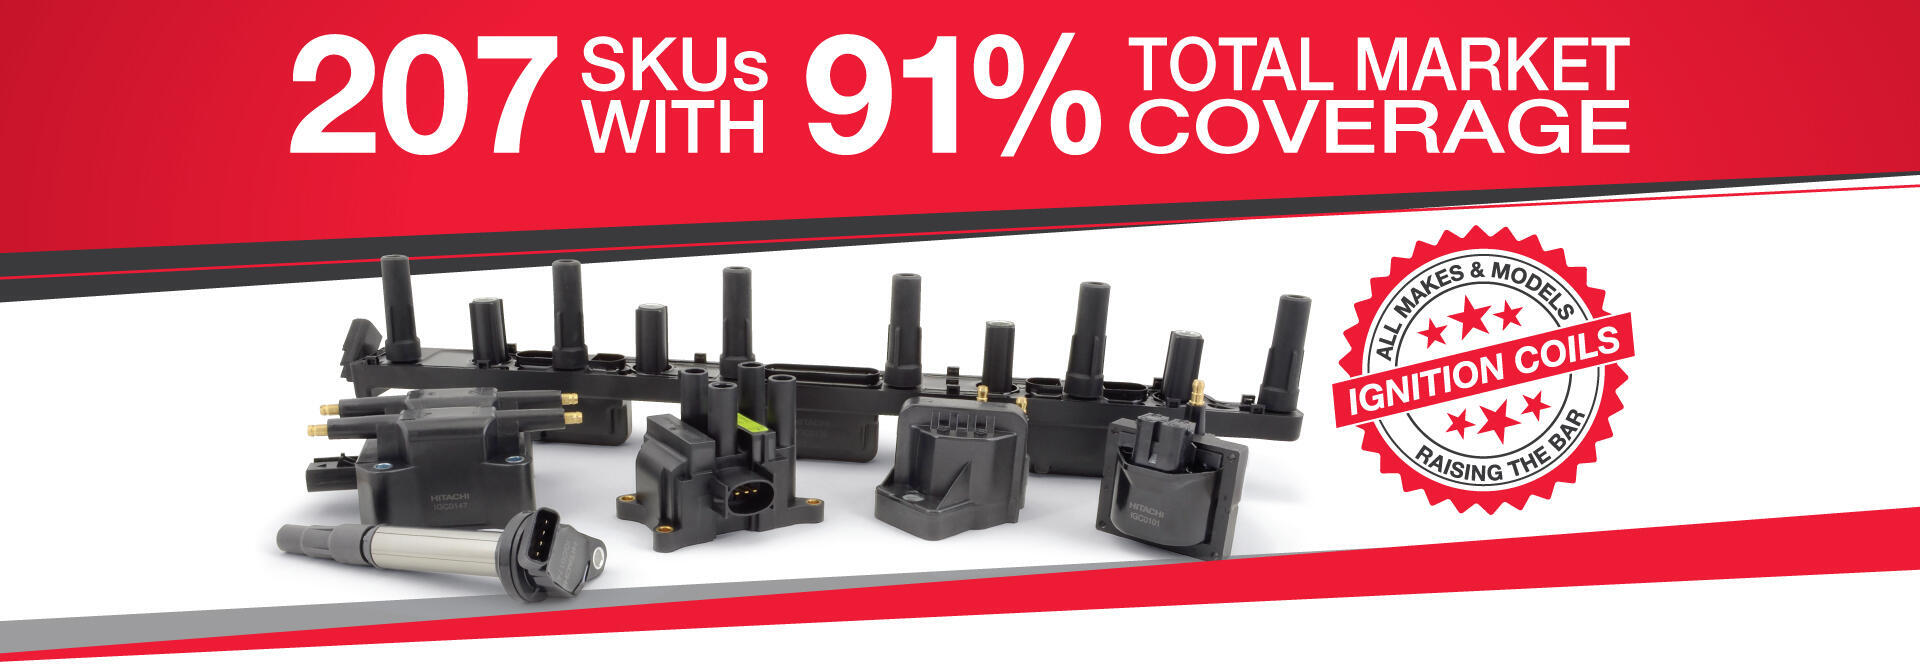 207 SKUs with 91% Total Market Coverage